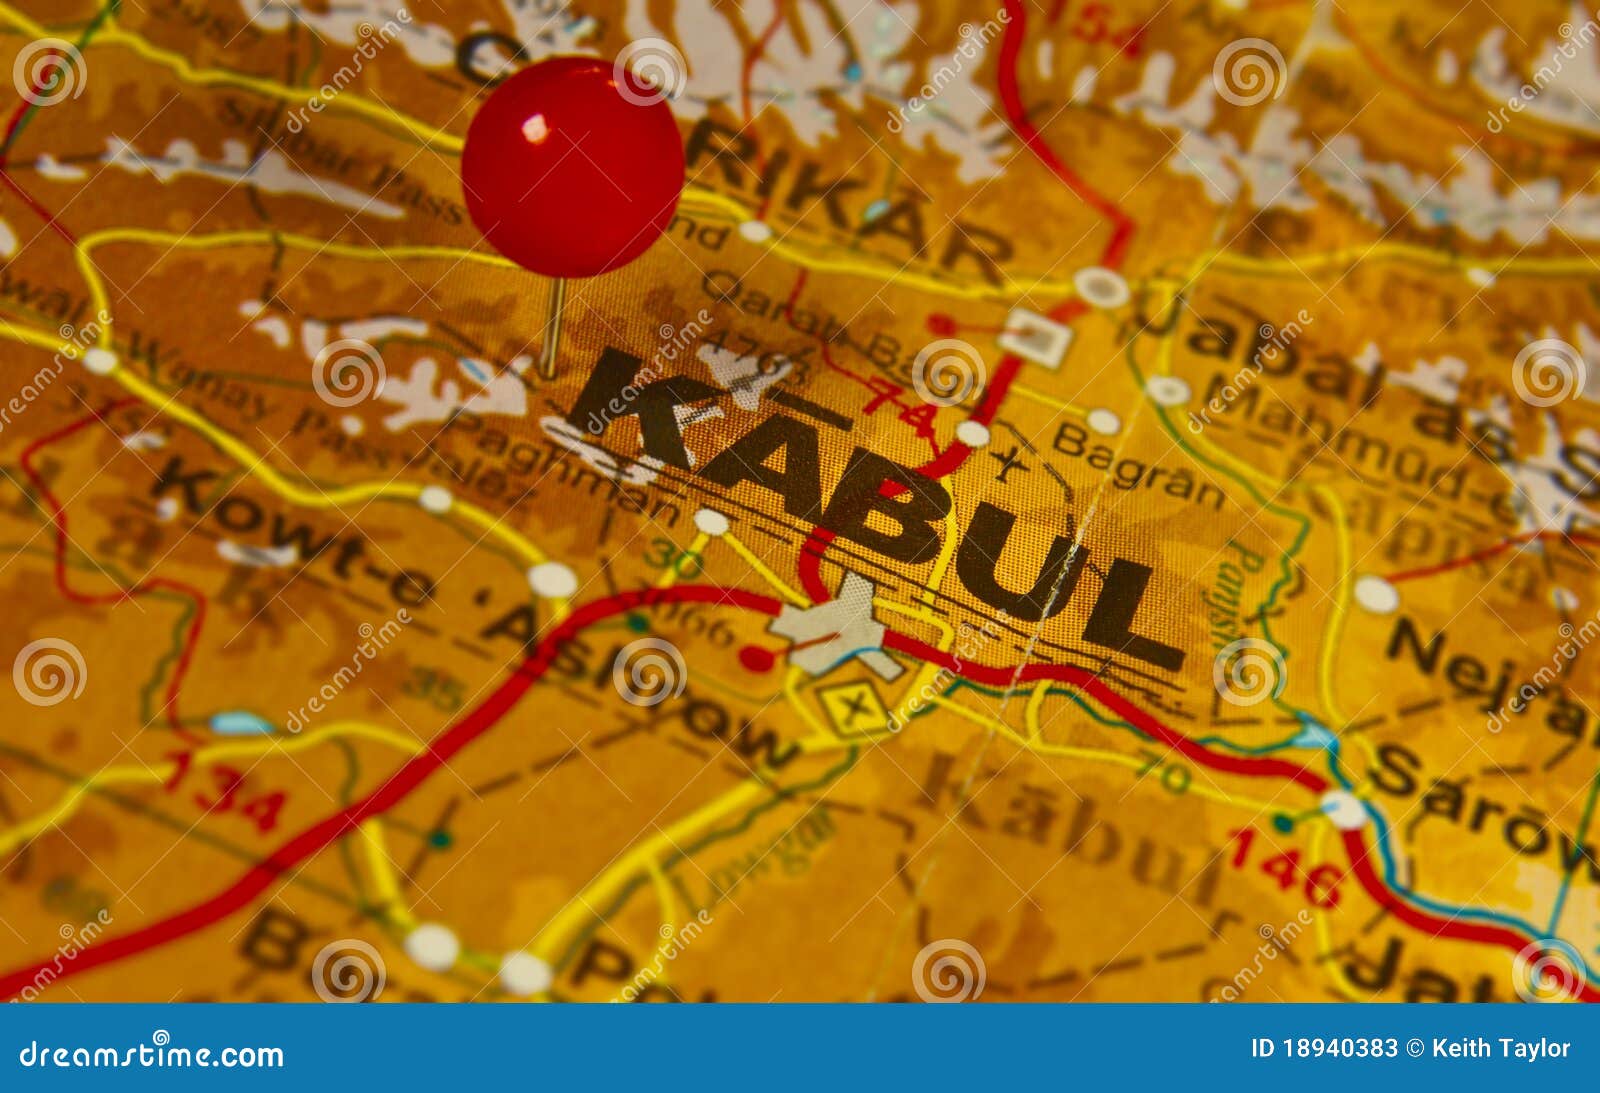 a map of kabul, afghanistan